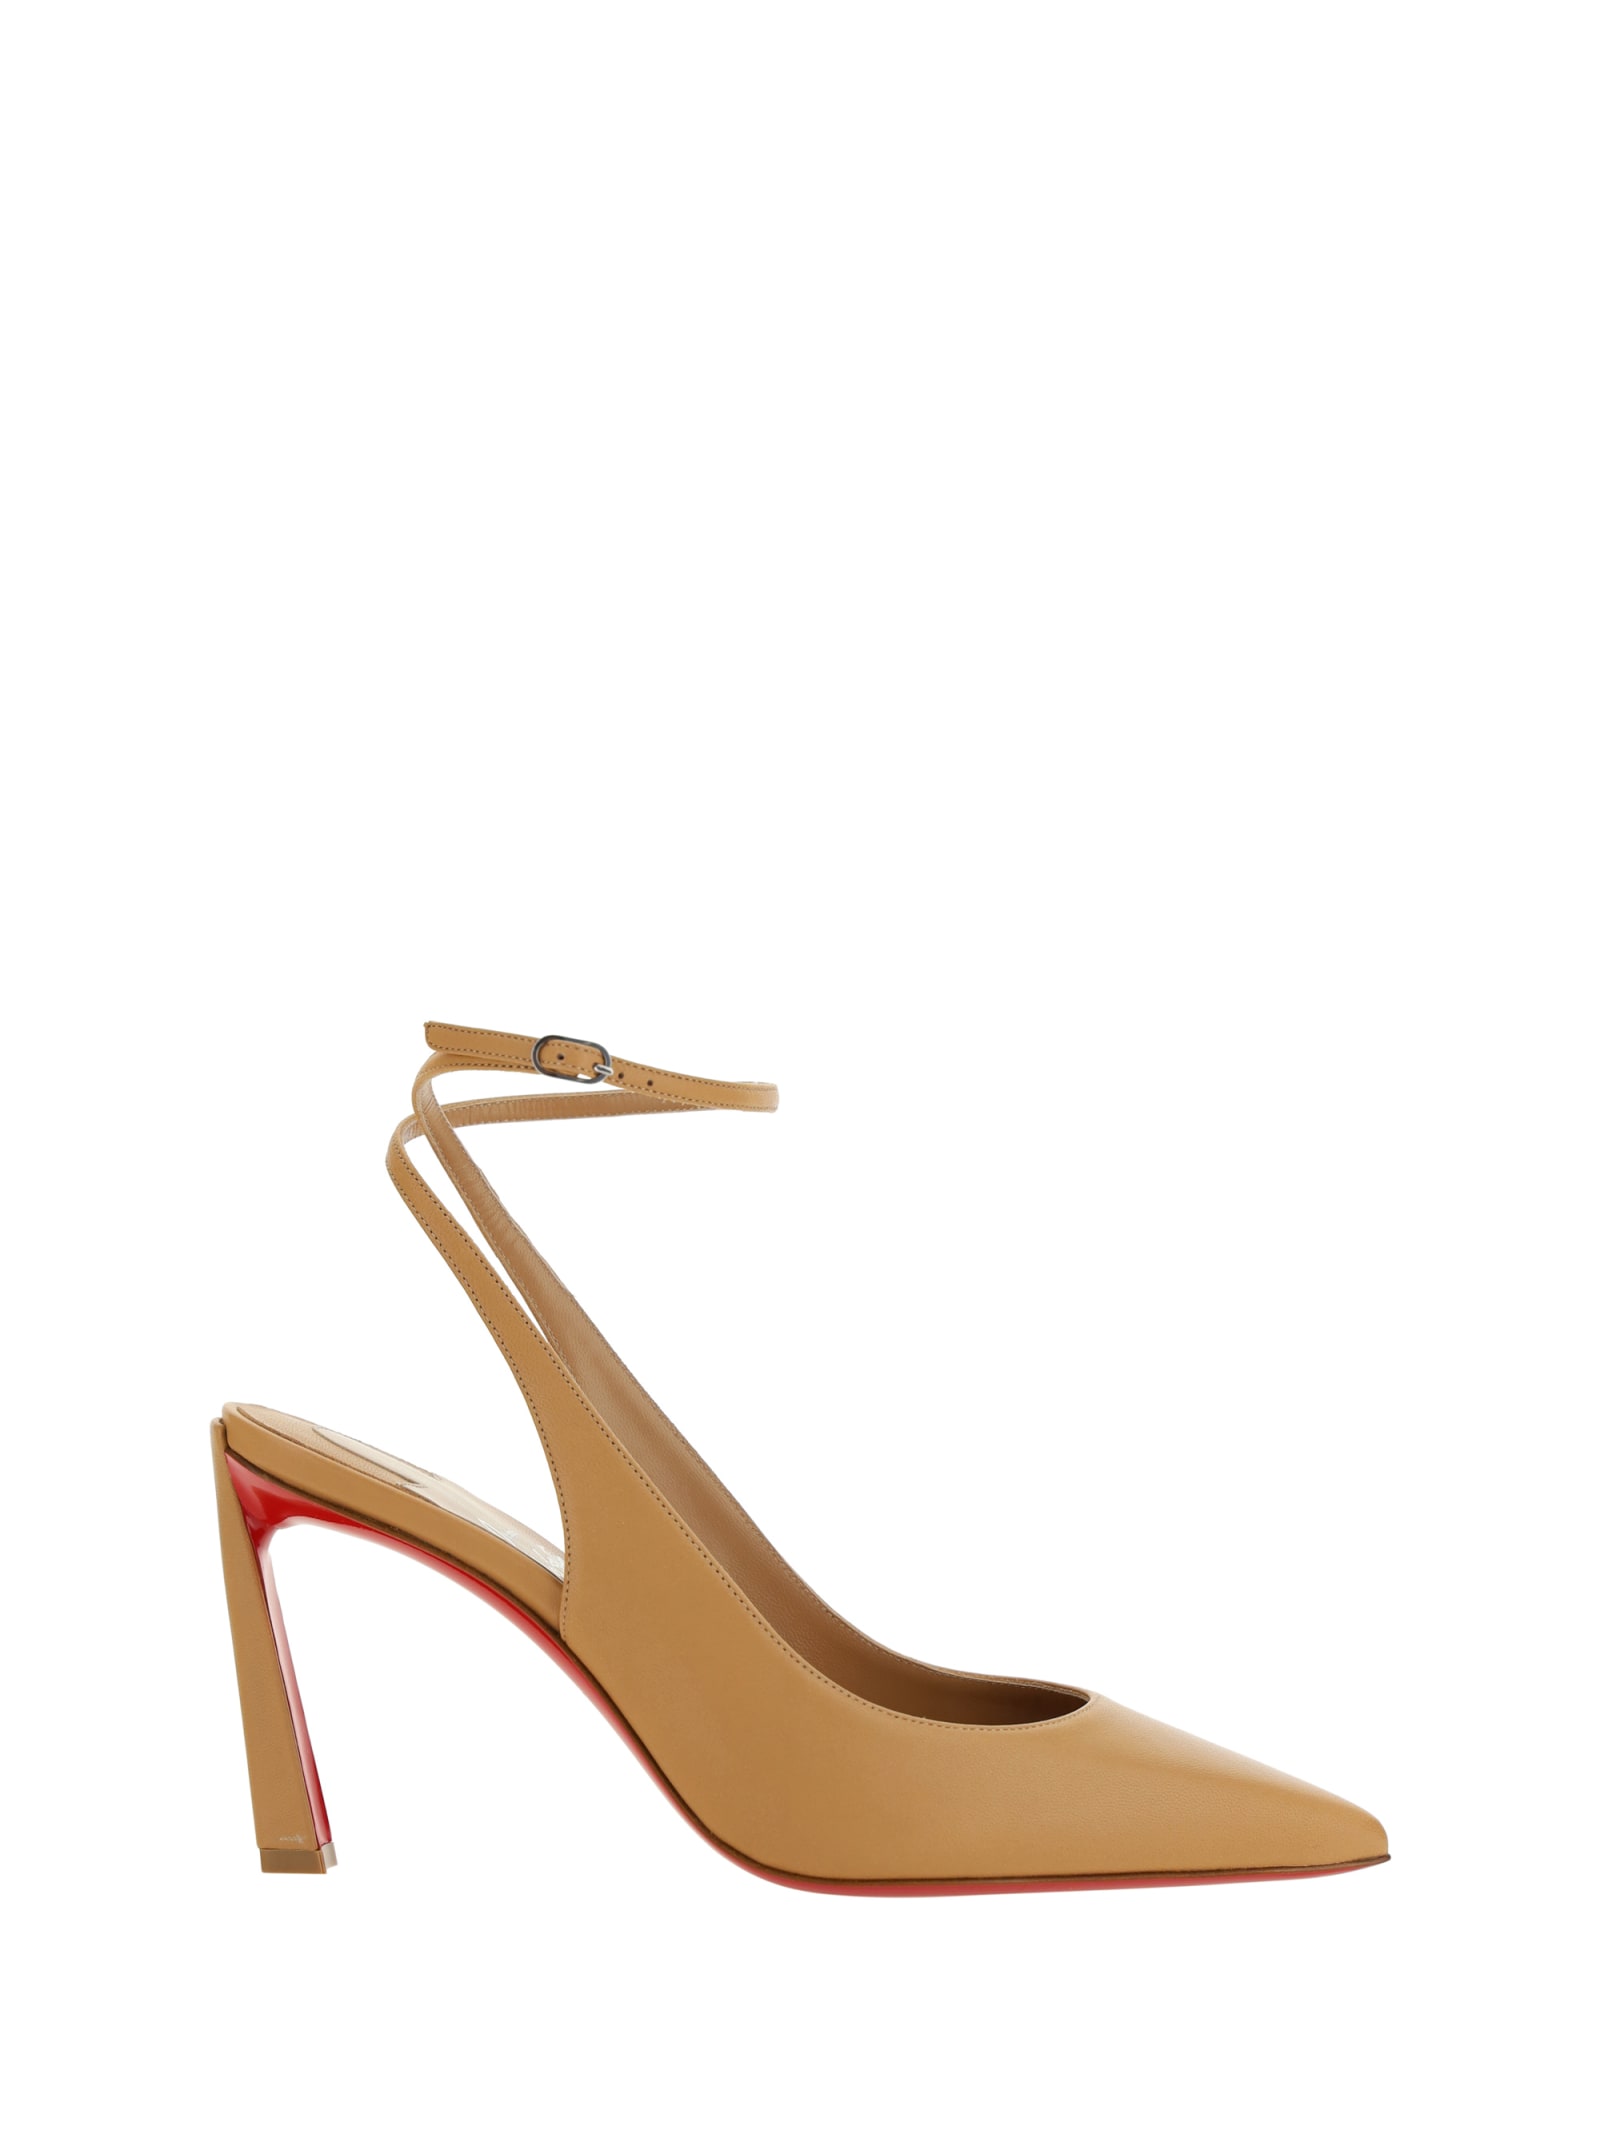 Shop Christian Louboutin Condora Strap Pumps In Toffee/lin Toffee